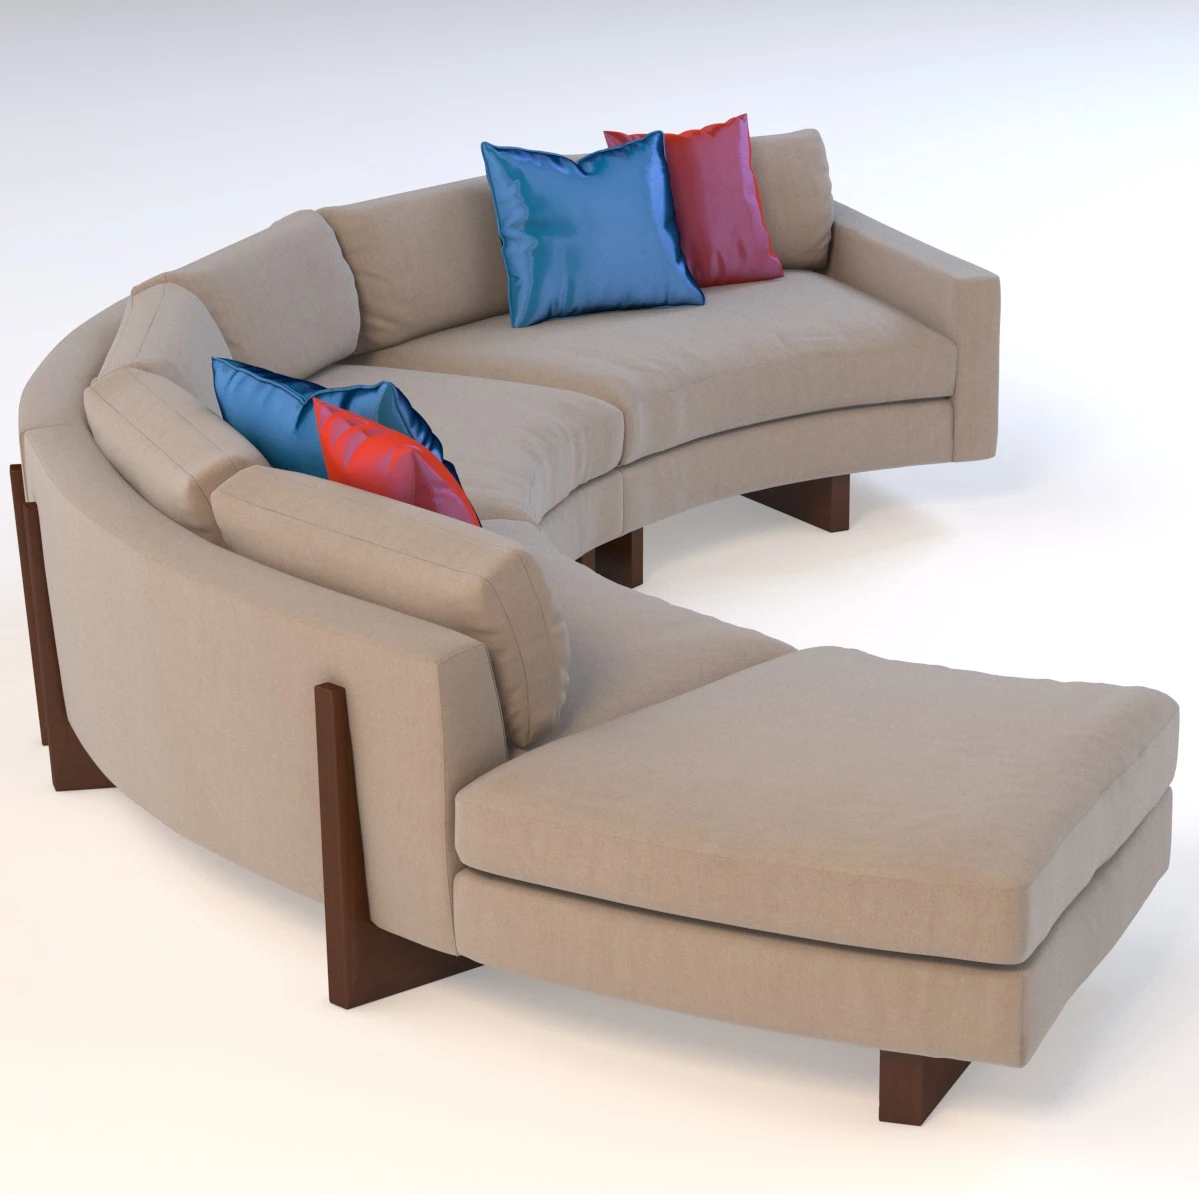 Toasted Clip Curved Sectional Sofa 3D Model_04